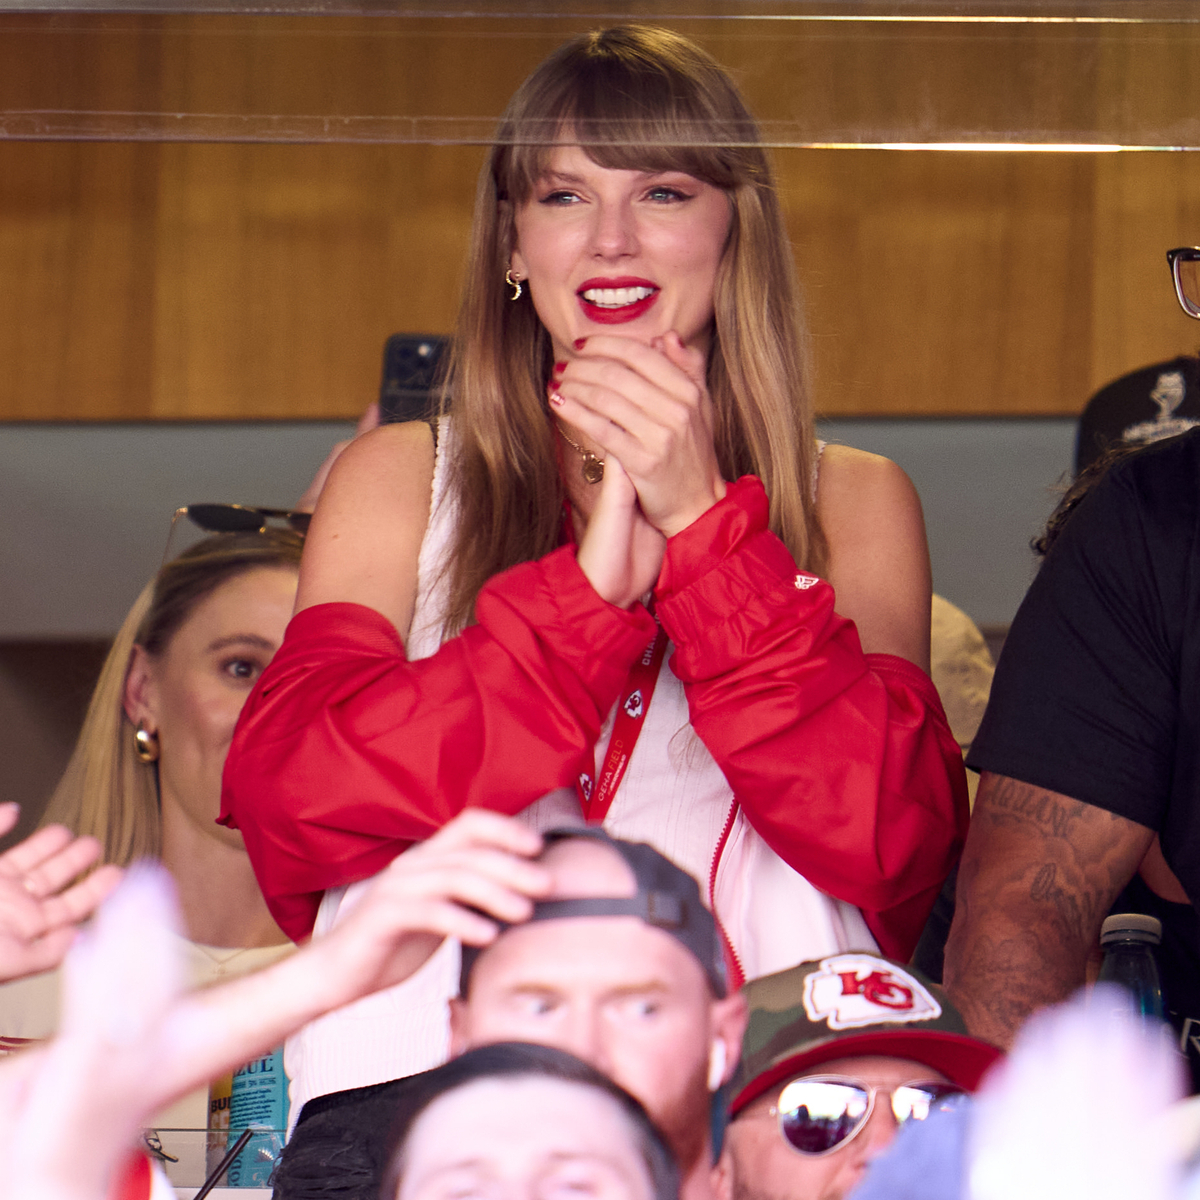 Why the NFL Considered Taylor Swift’s Eras Tour in Their New Schedule